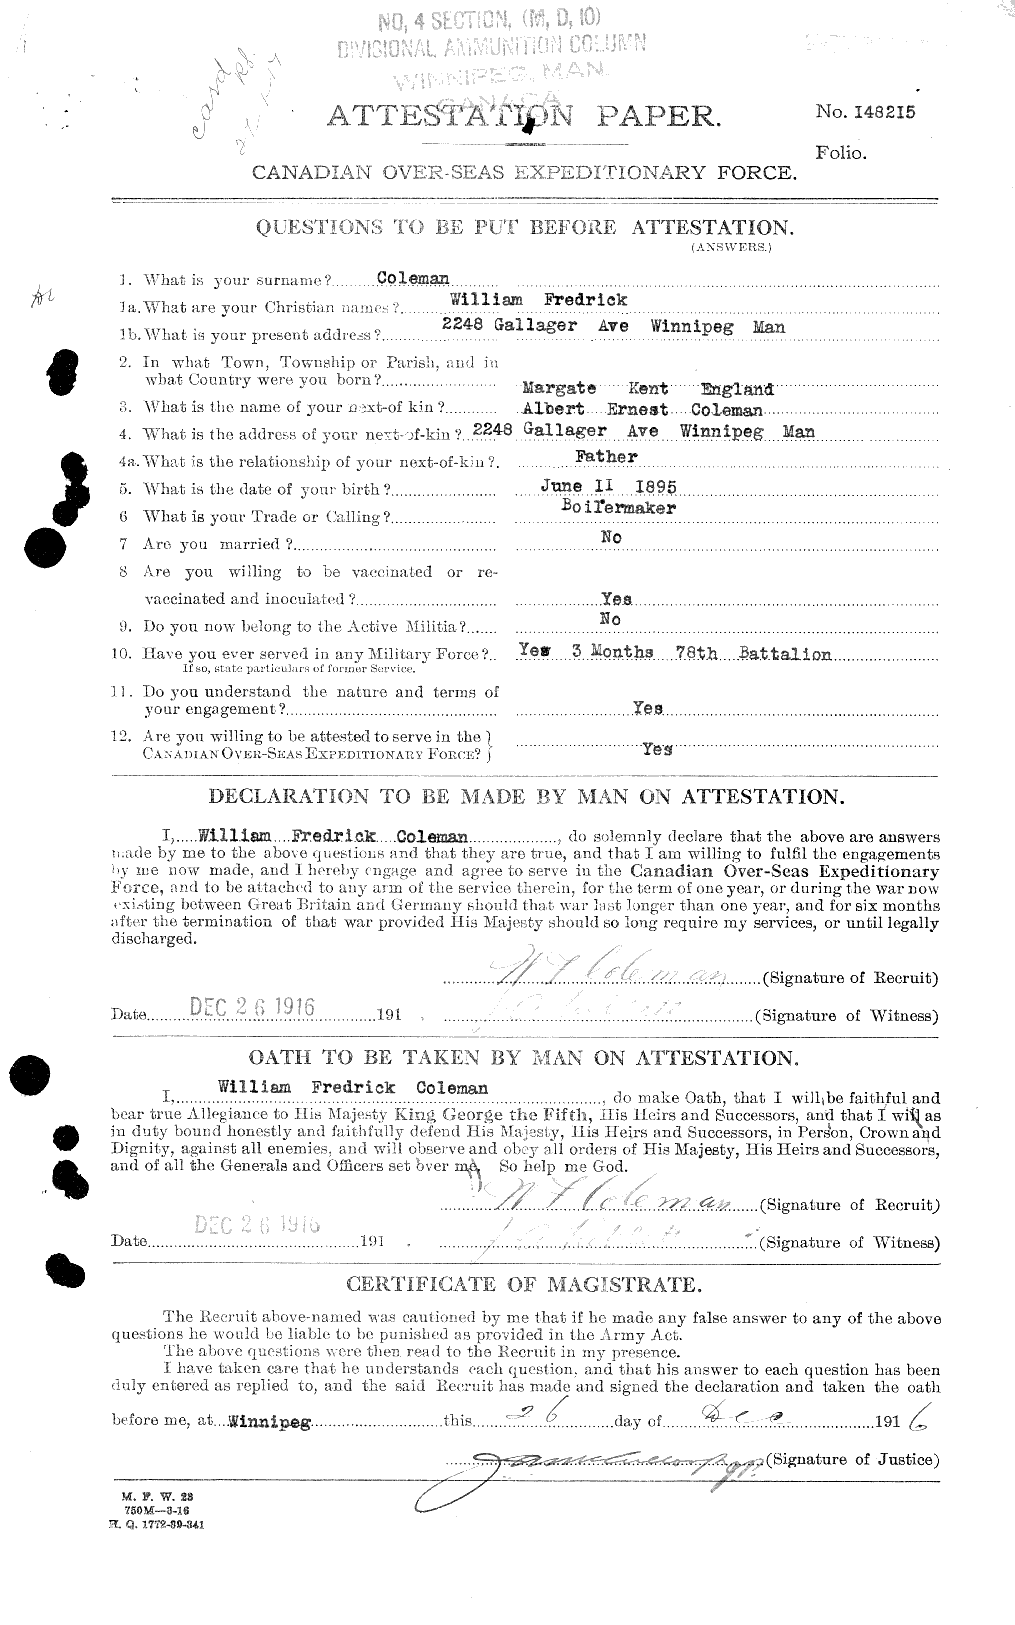 Personnel Records of the First World War - CEF 028310c